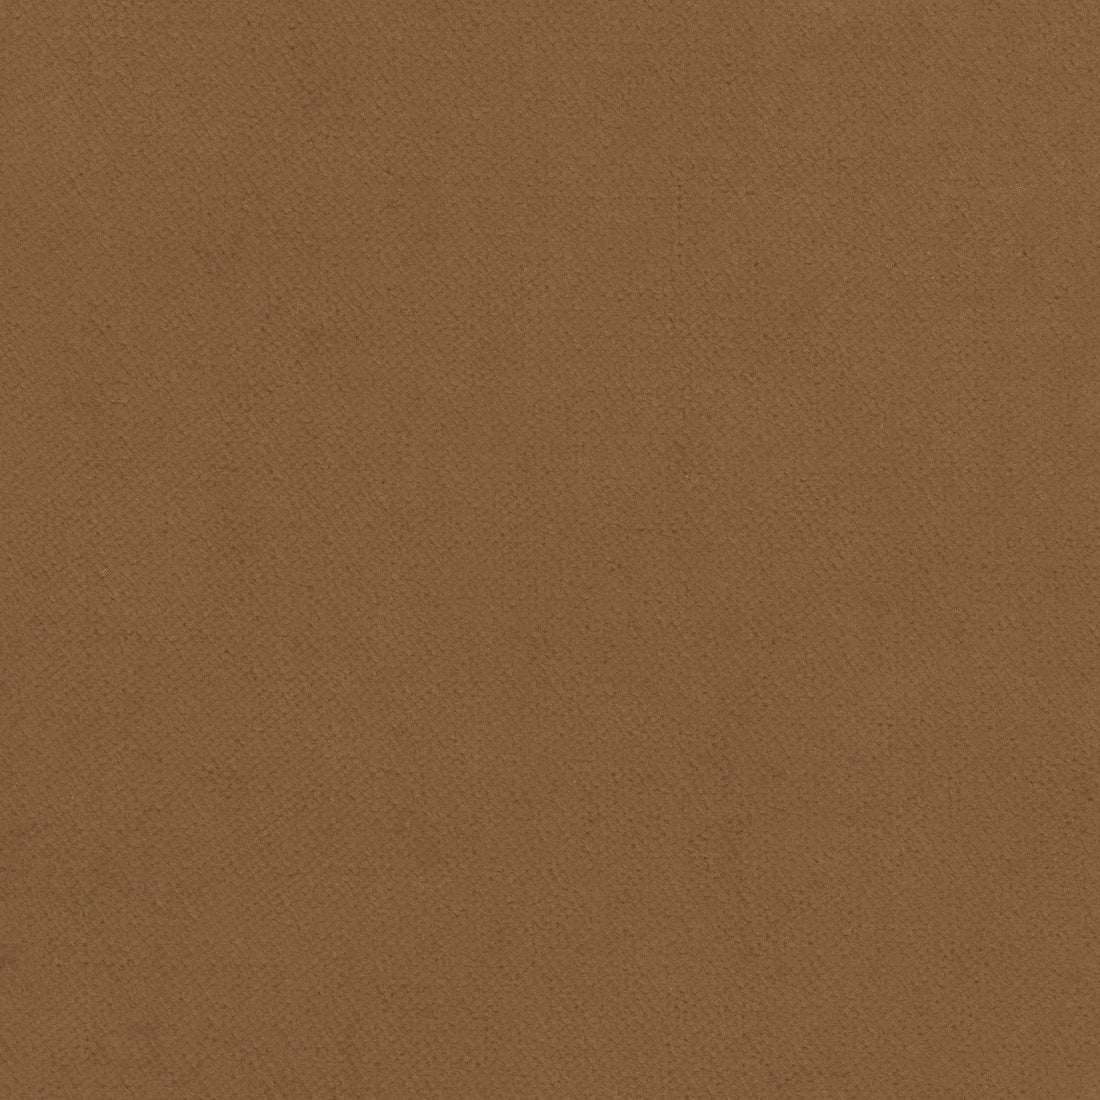 Club Velvet fabric in camel color - pattern number W7230 - by Thibaut in the Club Velvet collection